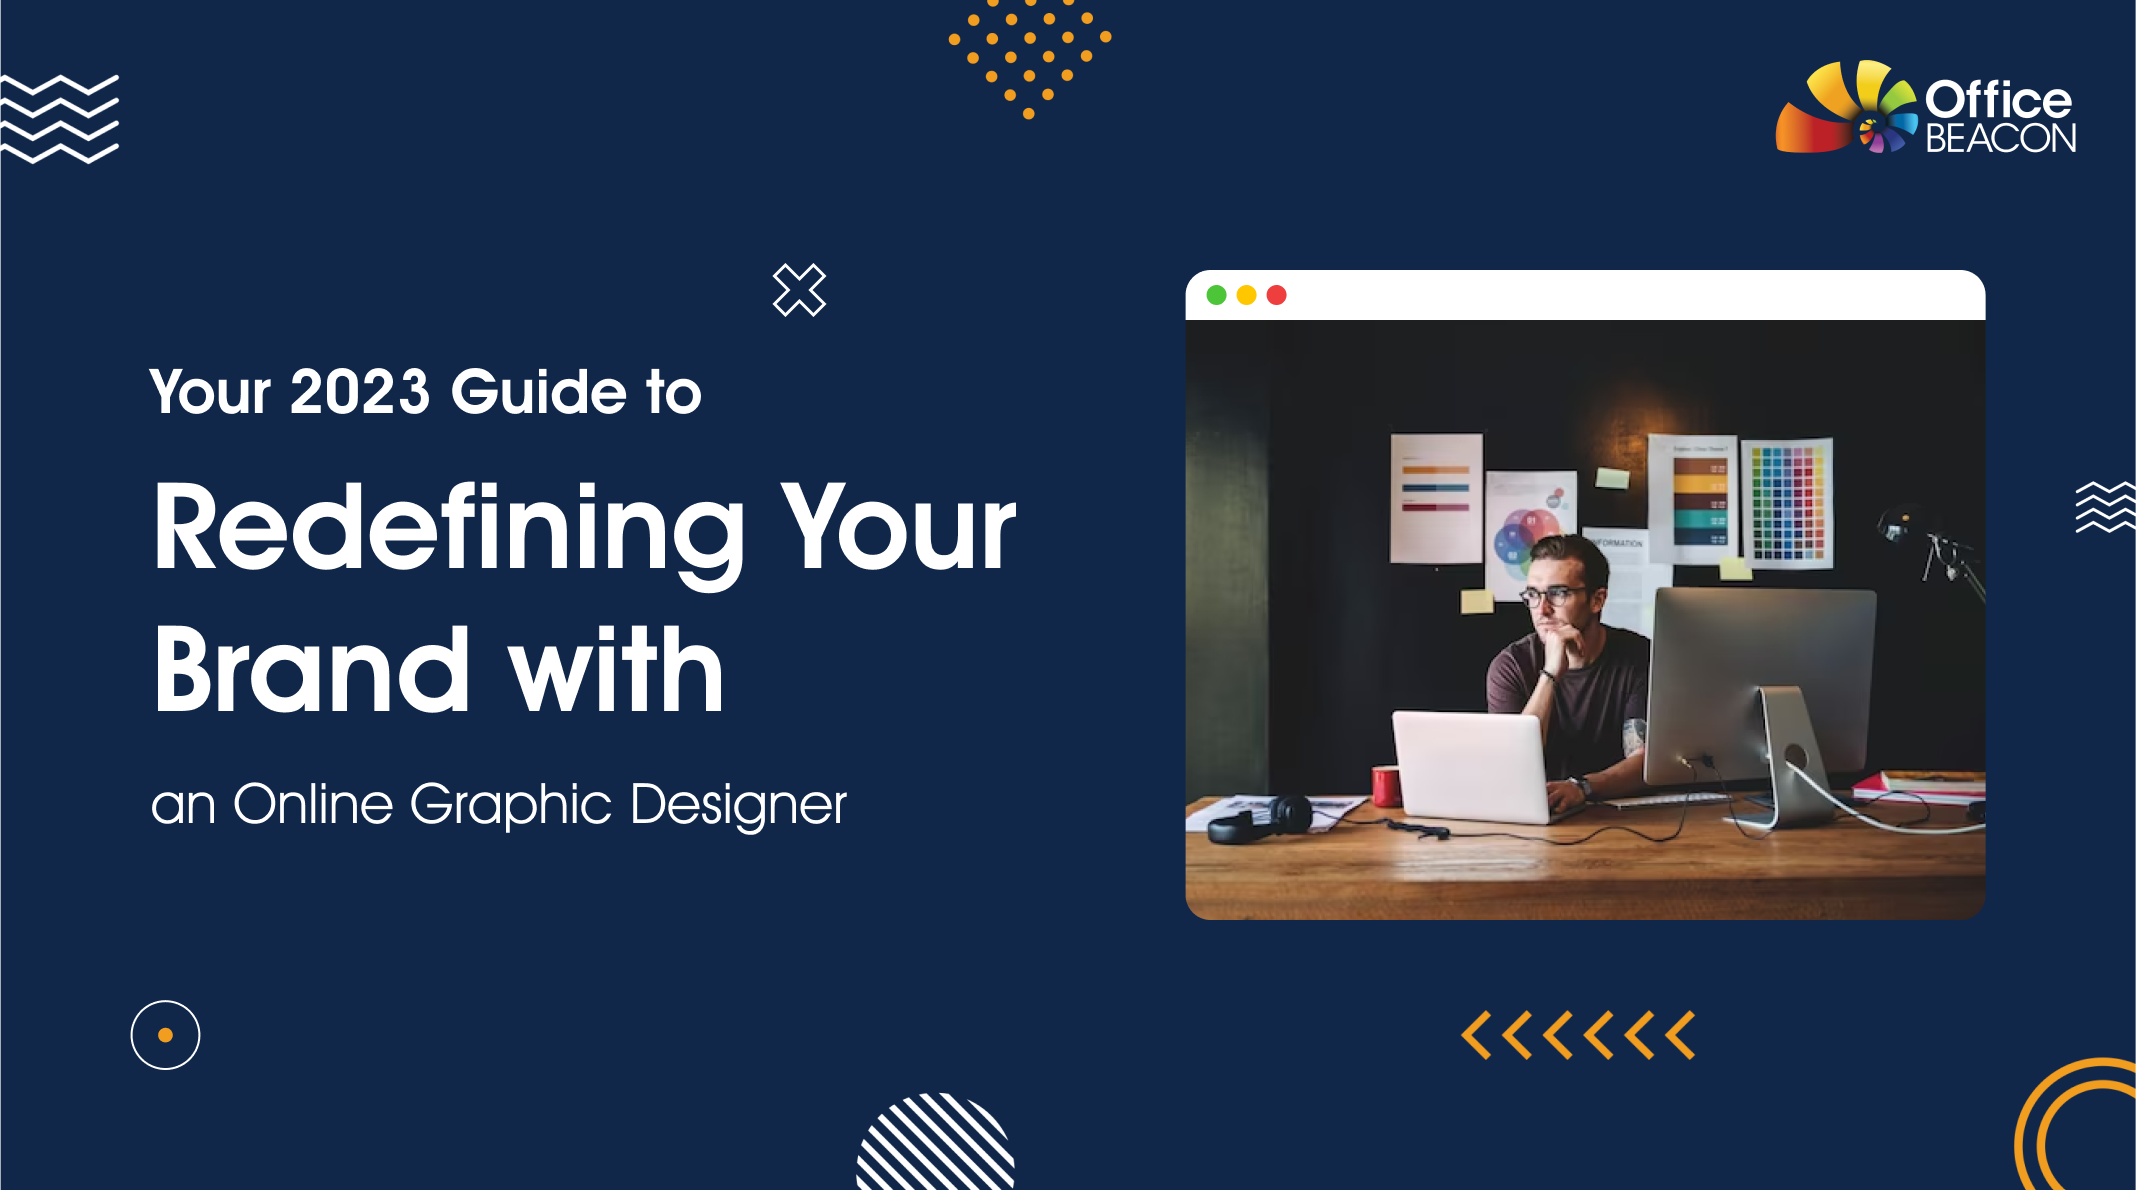 Your 2023 Guide to Redefining Your Brand with an Online Graphic Designer